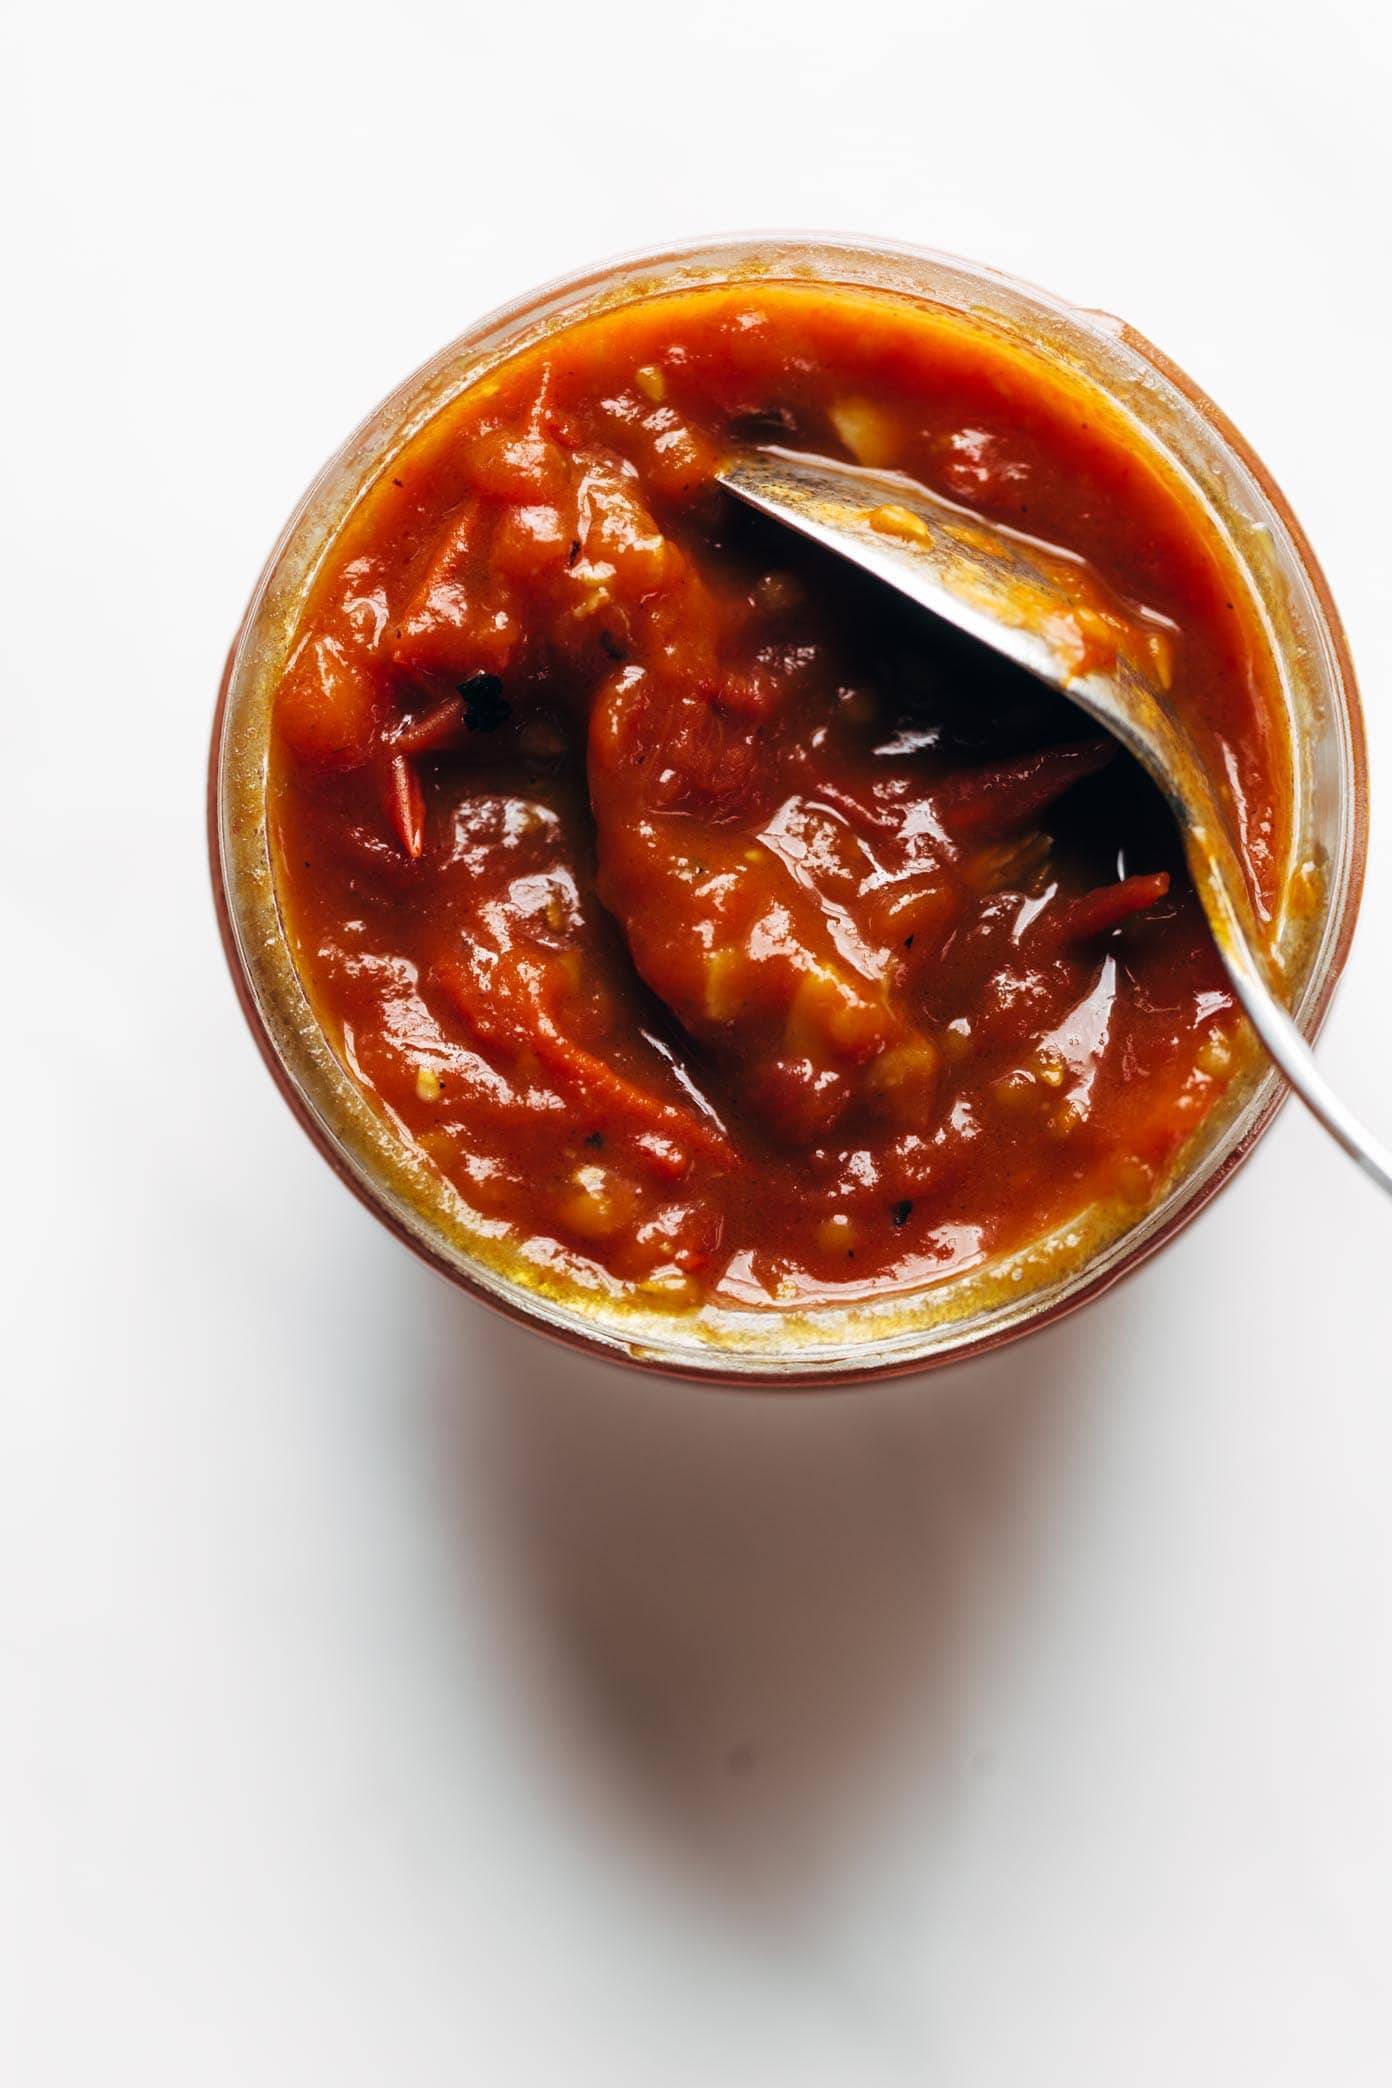 Basic Garlic Butter Tomato sauce in a jar with a spoon